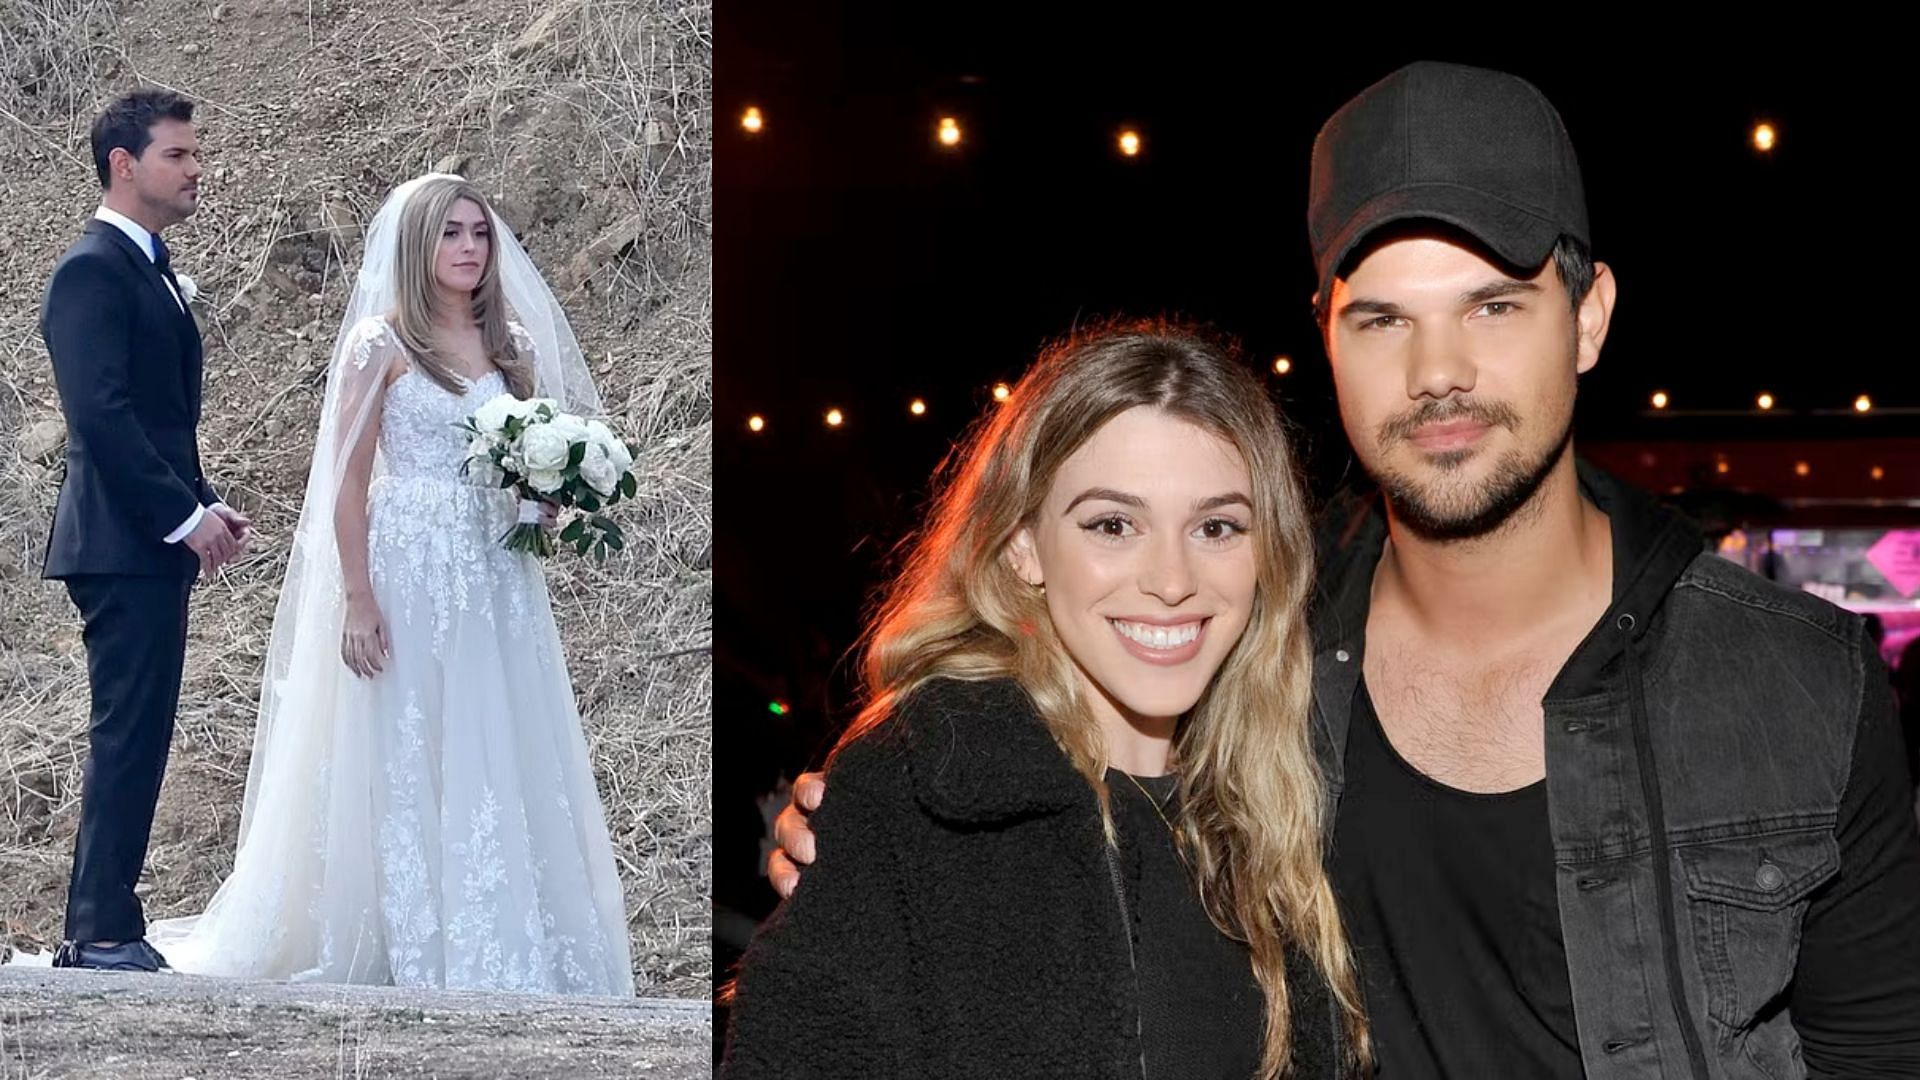 Taylor Lautner marries girlfriend Taylor Dome (image via Getty/Aiim and Nights of the J)